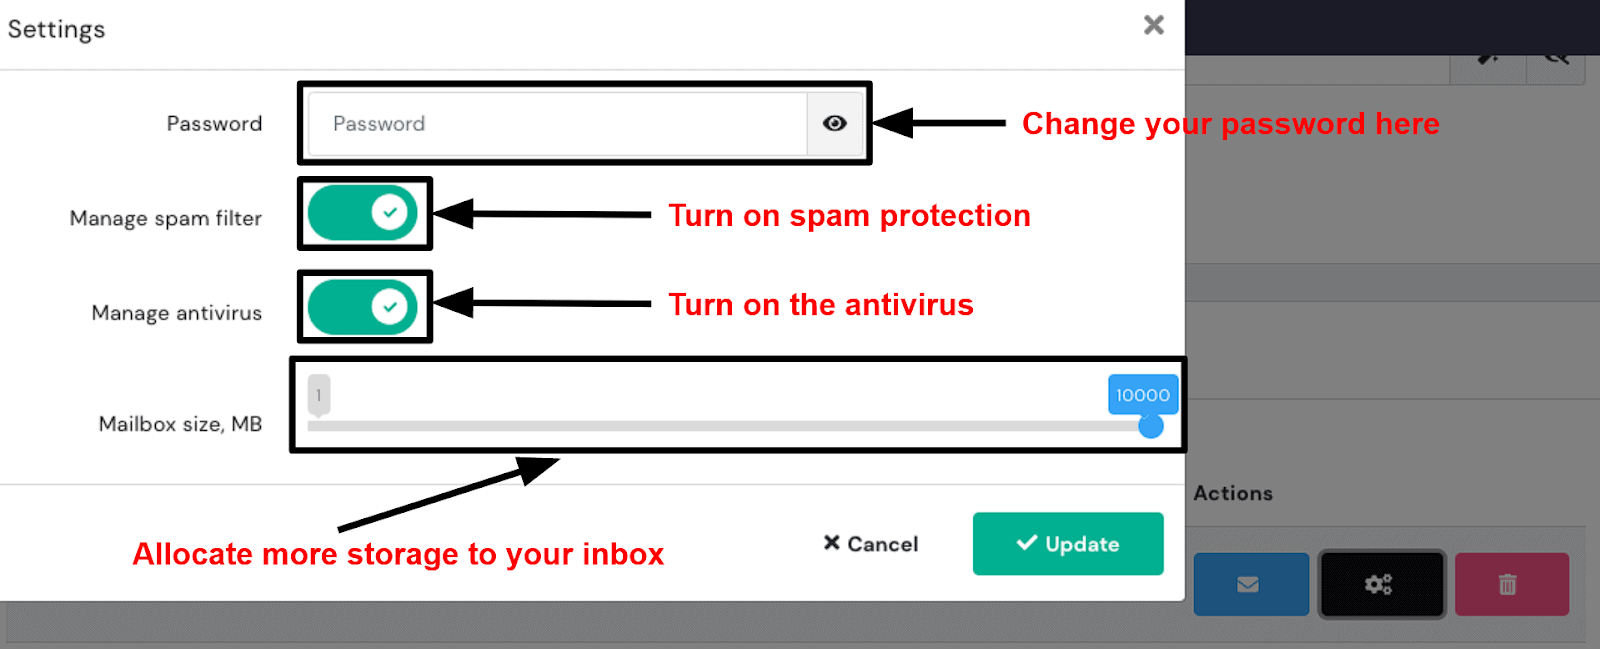 hPanel - email settings screen